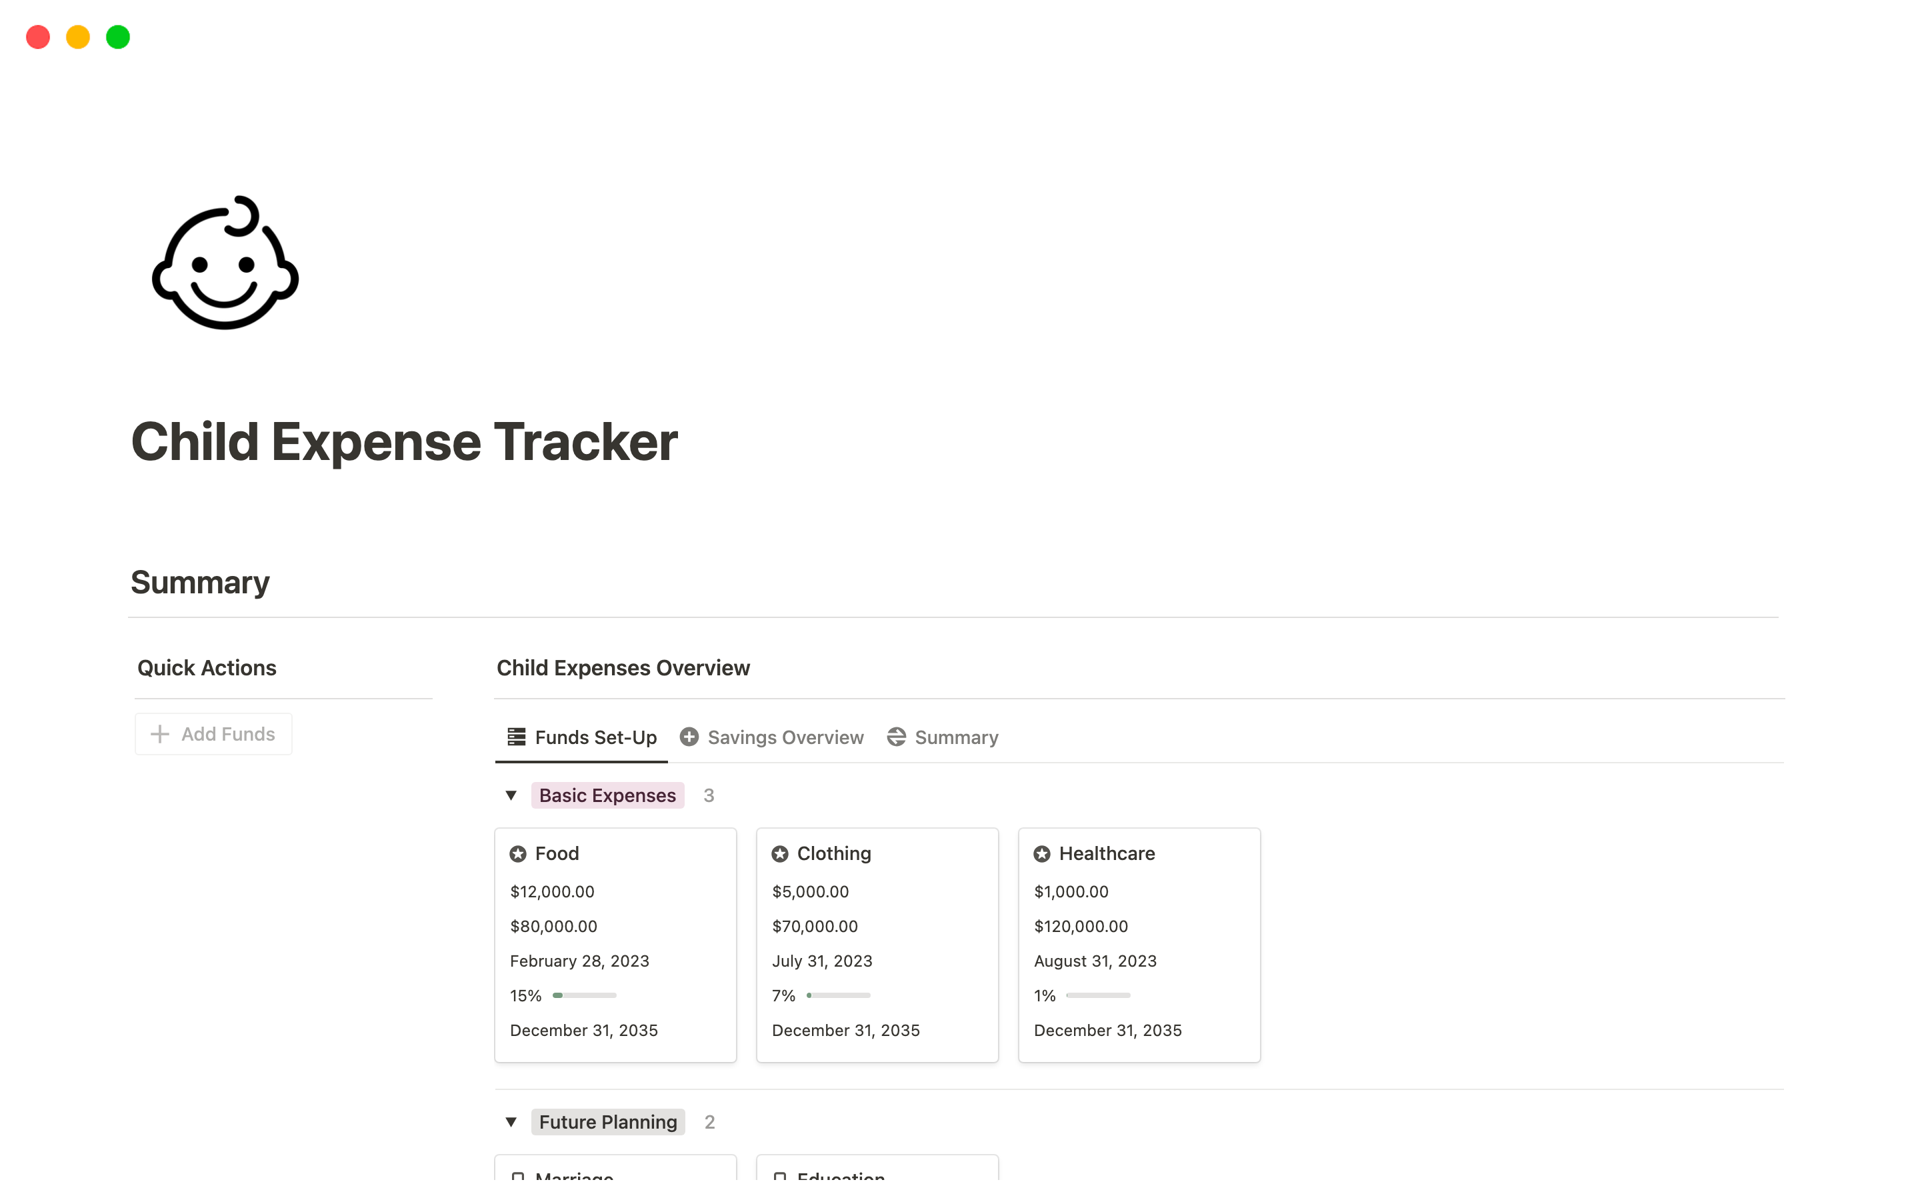 Parents can use this tracker to monitor and plan for expenses related to their children, including education, healthcare, extracurricular activities, and more.